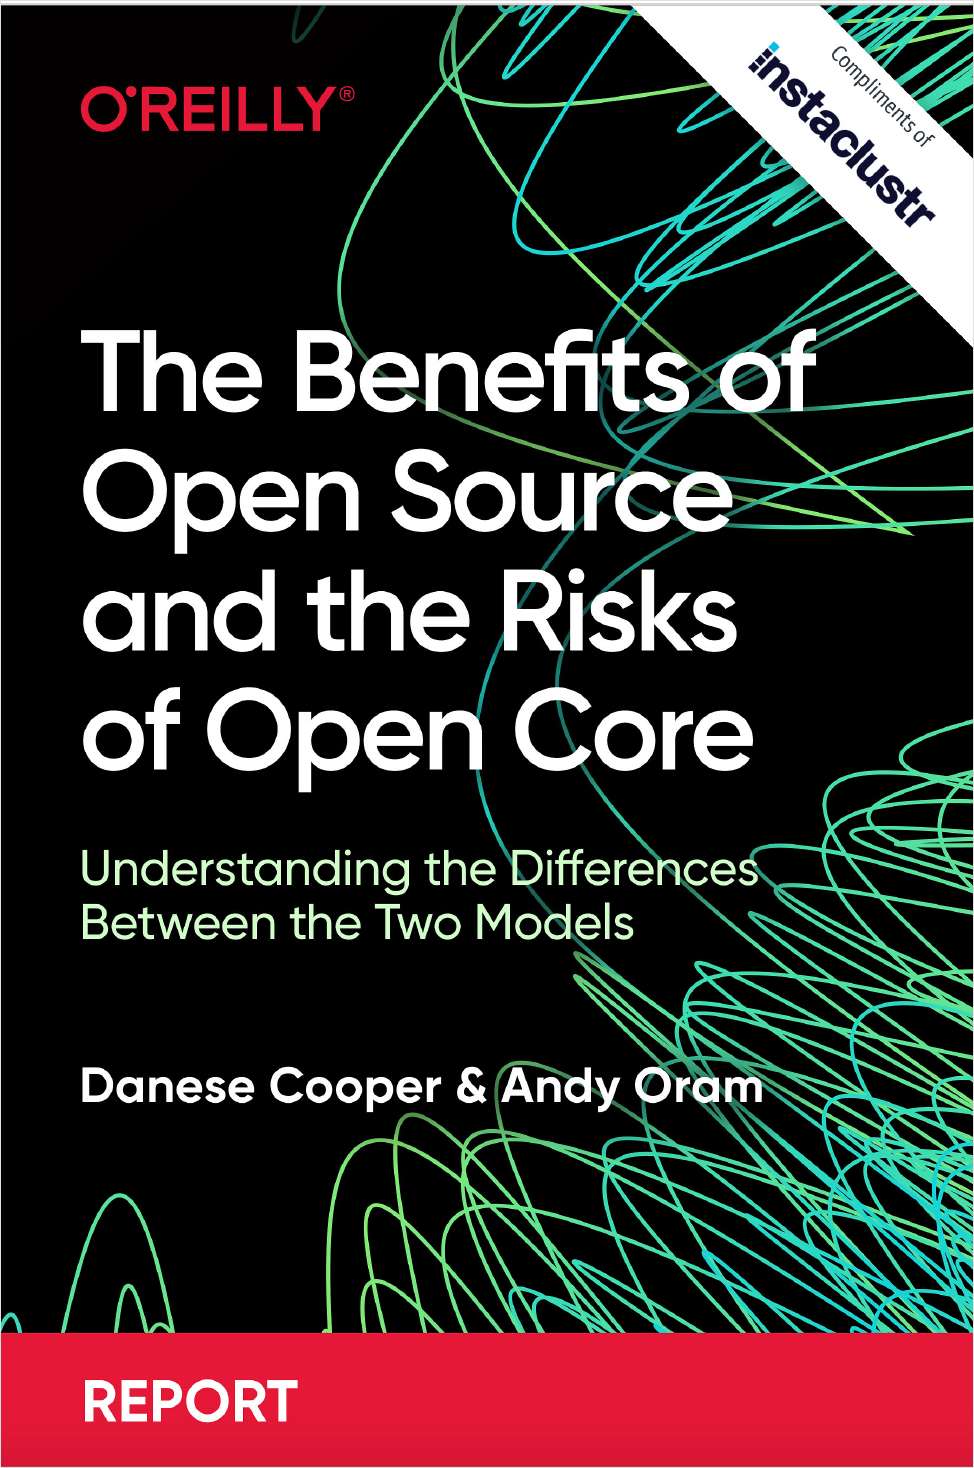 Understanding the Difference Between the Open Source and Open Core